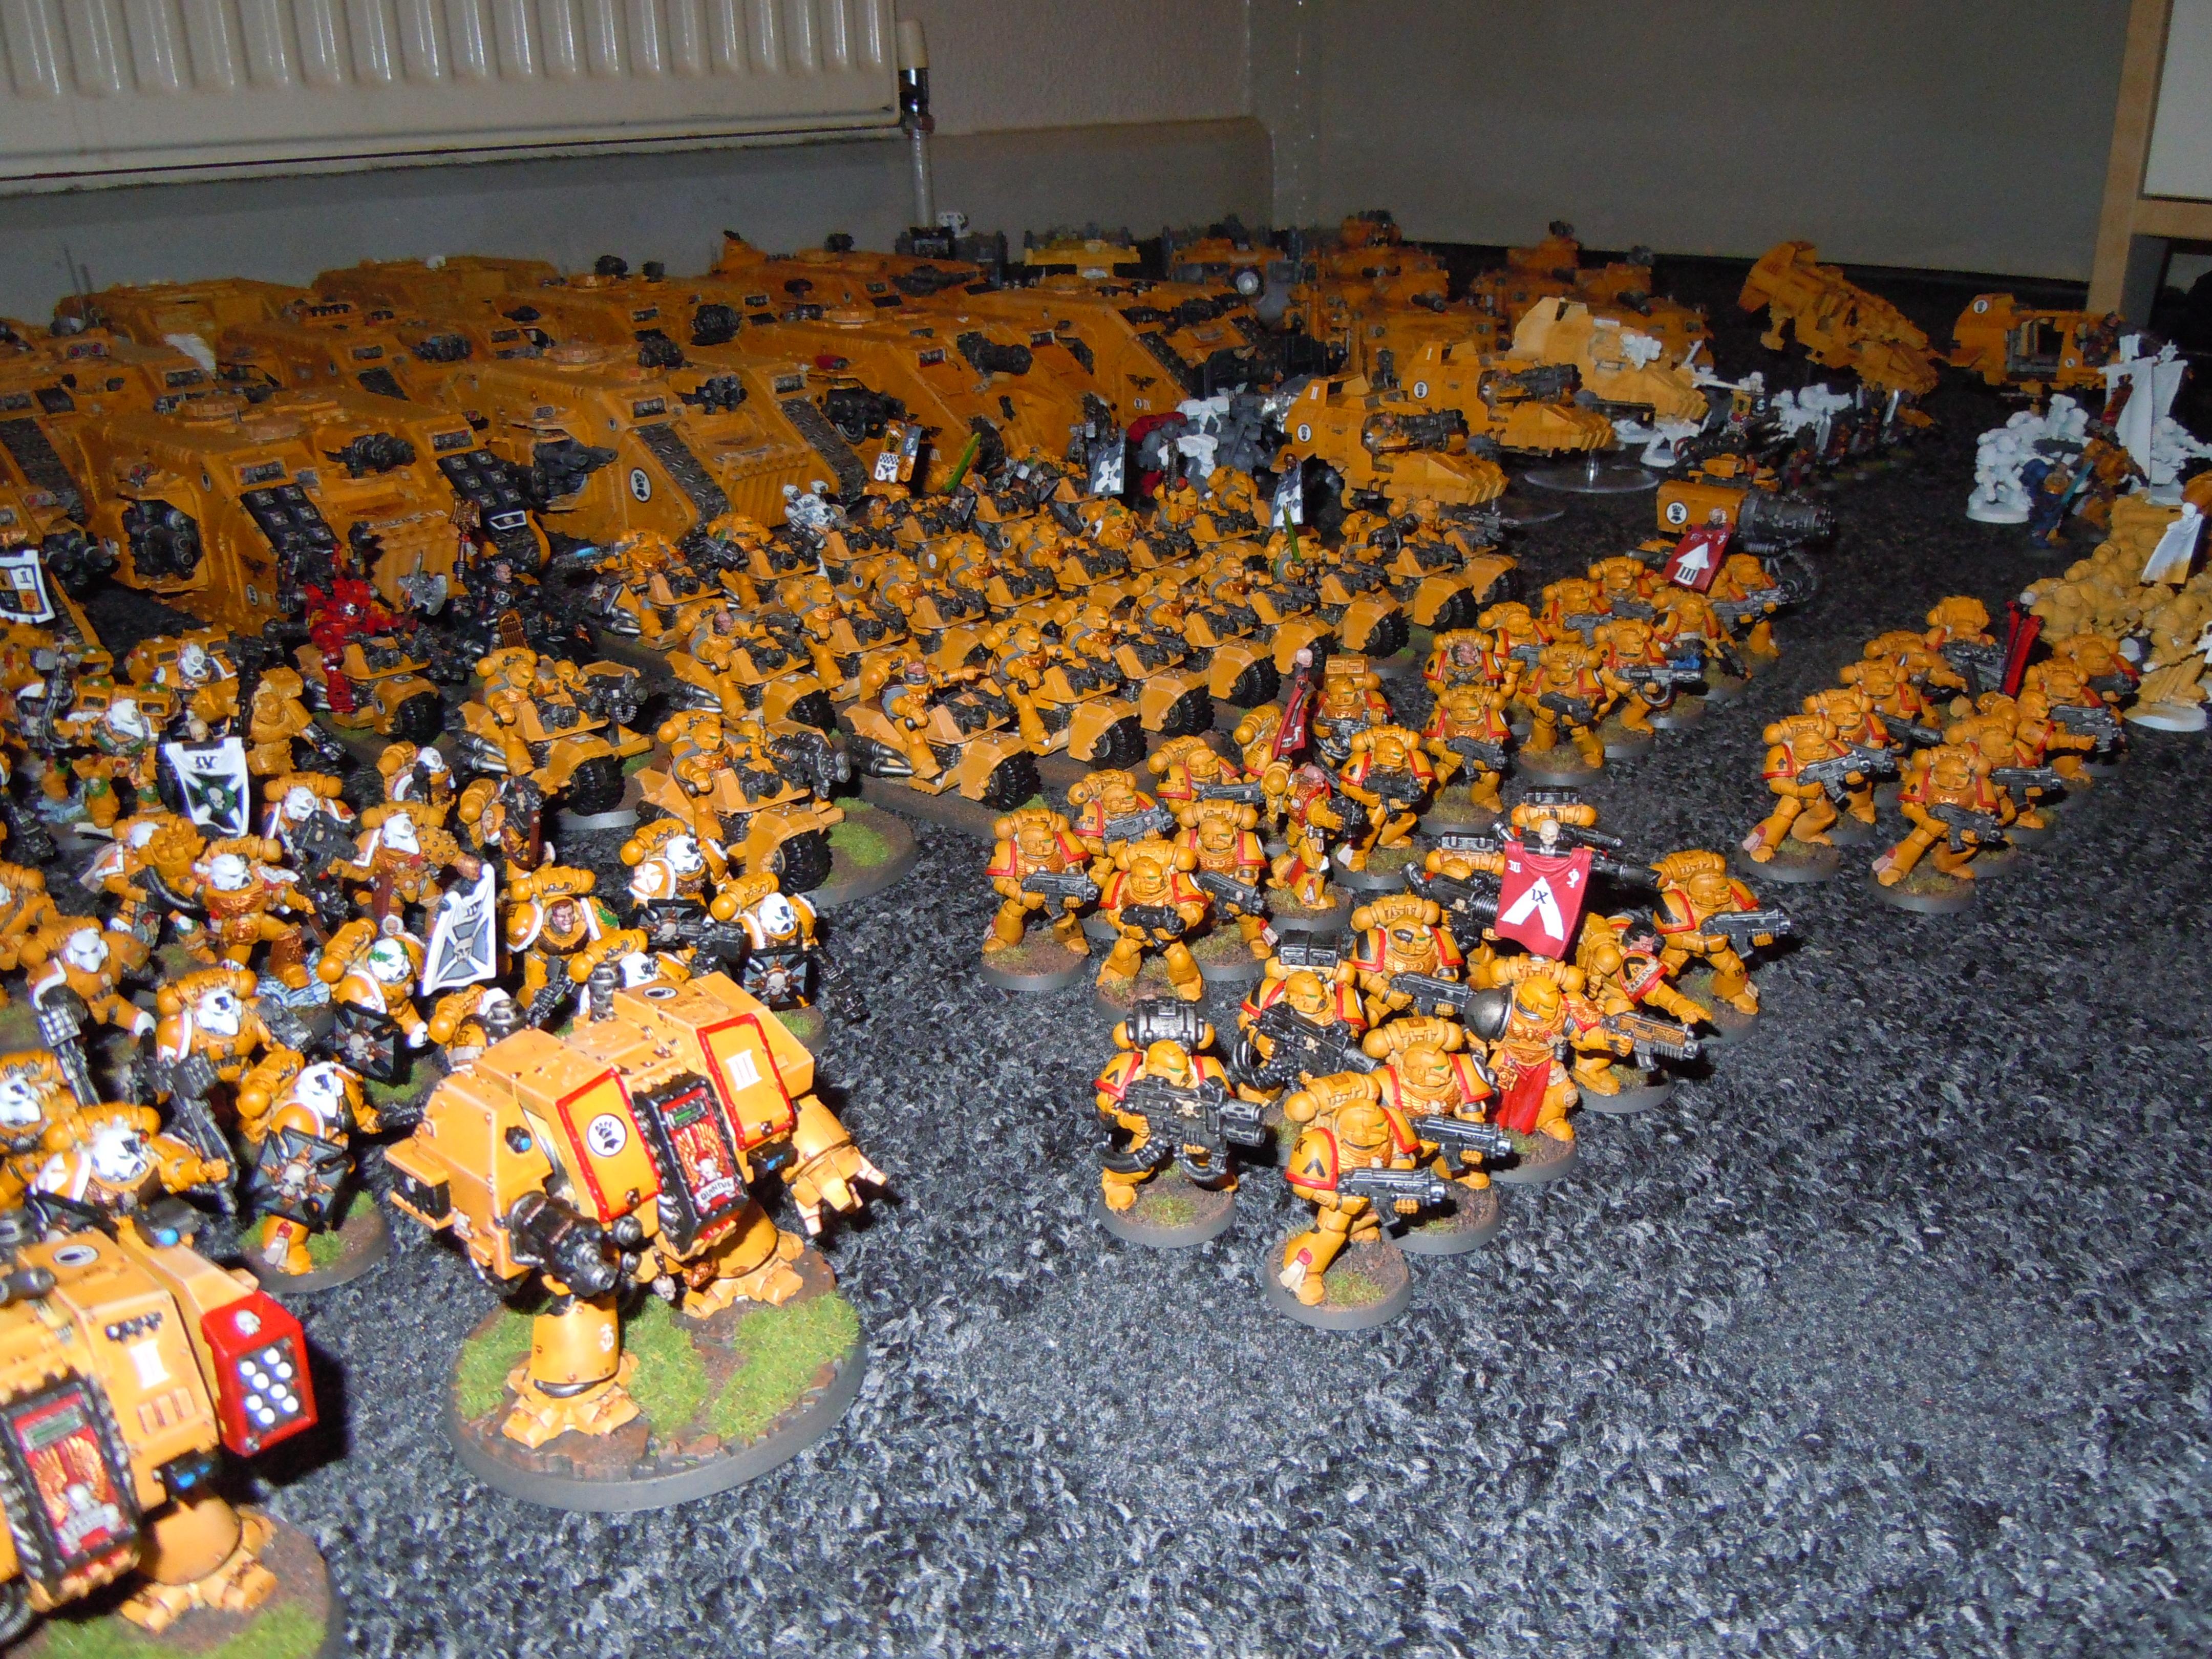 Army, Imperial Fists, Space Marines, Warhammer 40,000